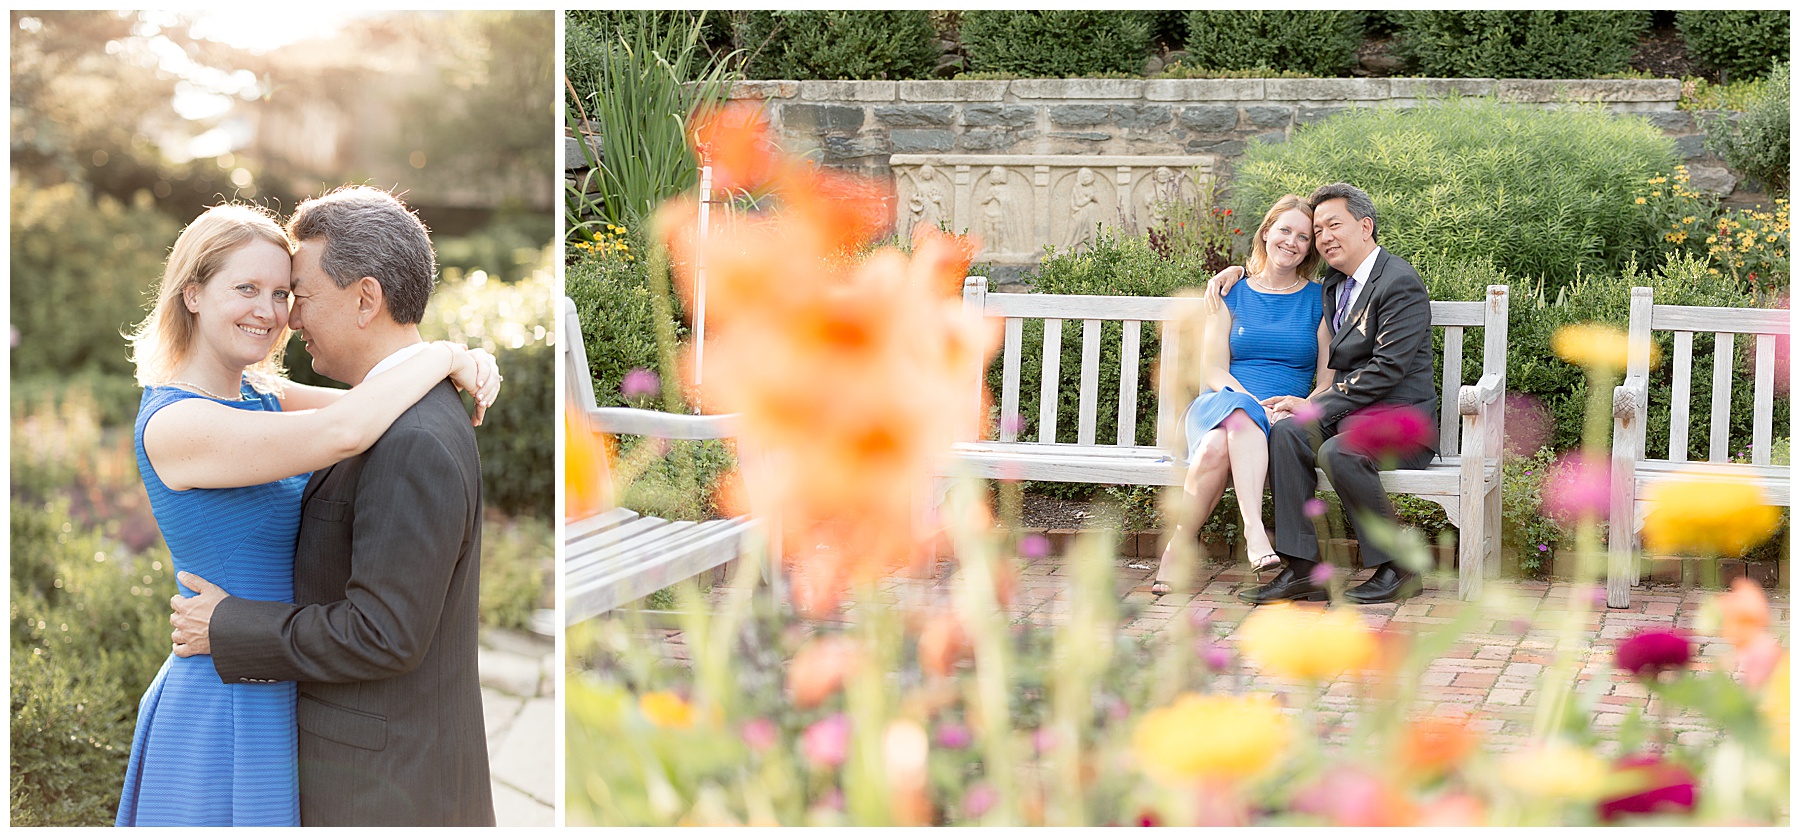 Beautiful gardens on display at Bishop's Garden Engagement Session